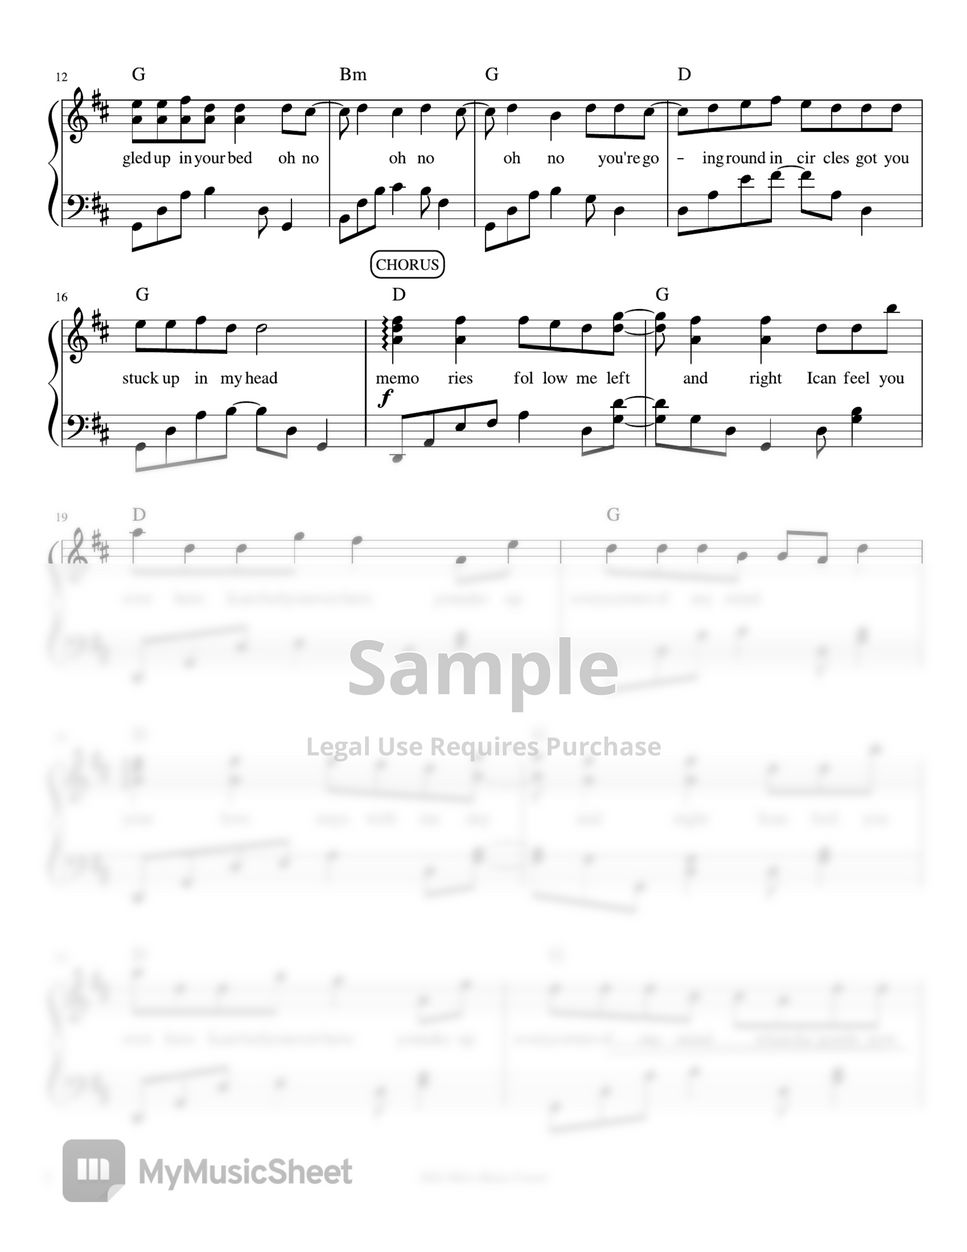 Charlie Puth - Left and Right (piano sheet music) by Mel's Music Corner